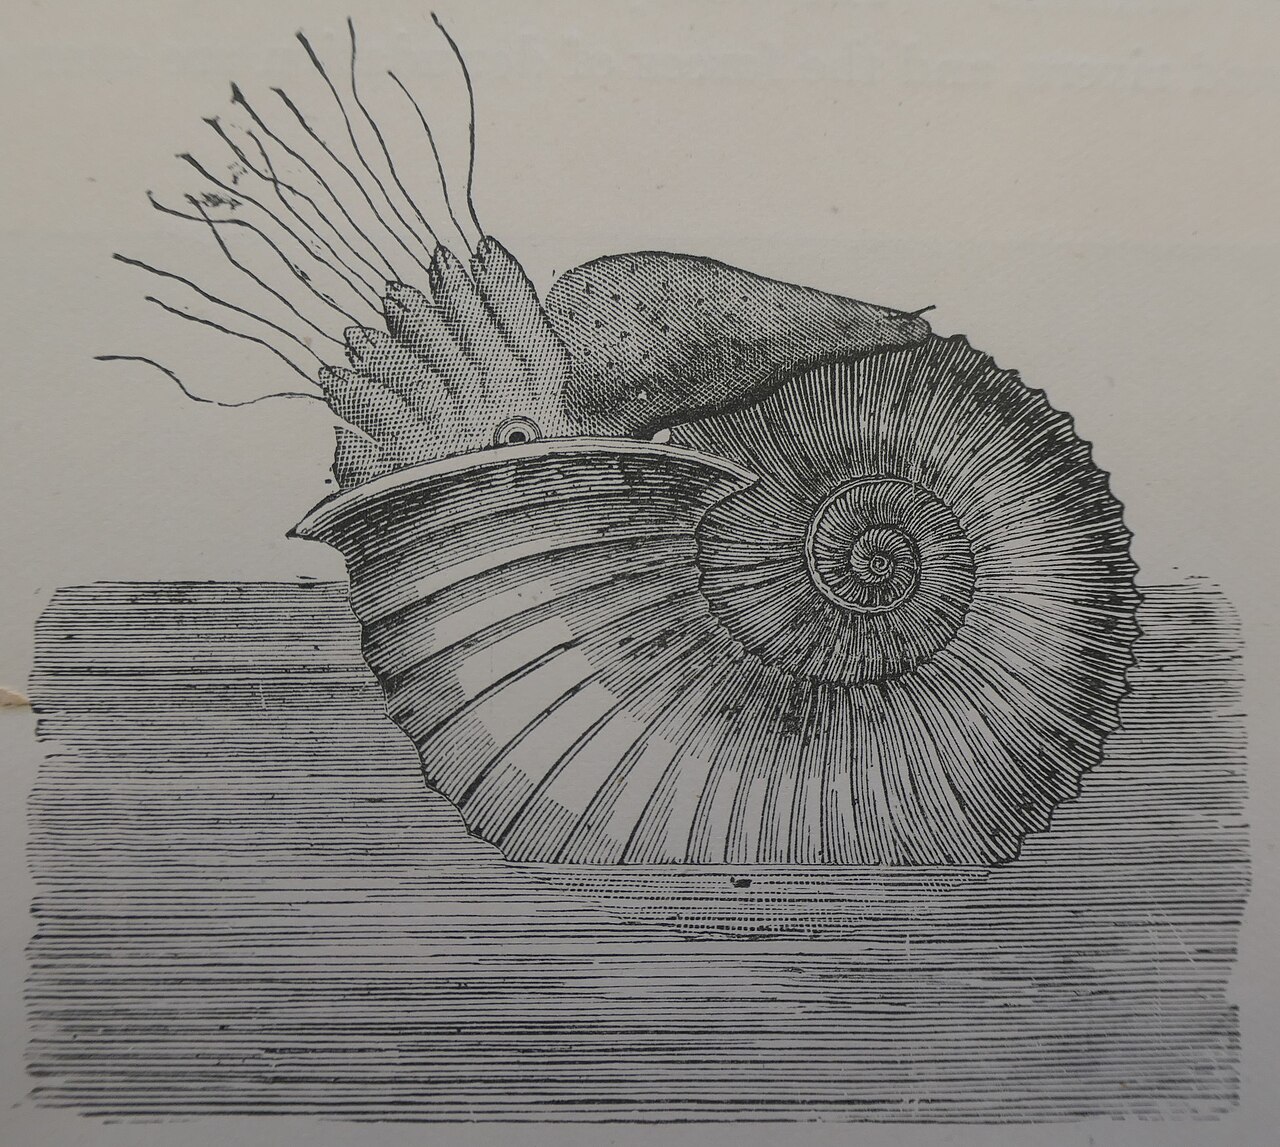 Ammonite depicted from fossil